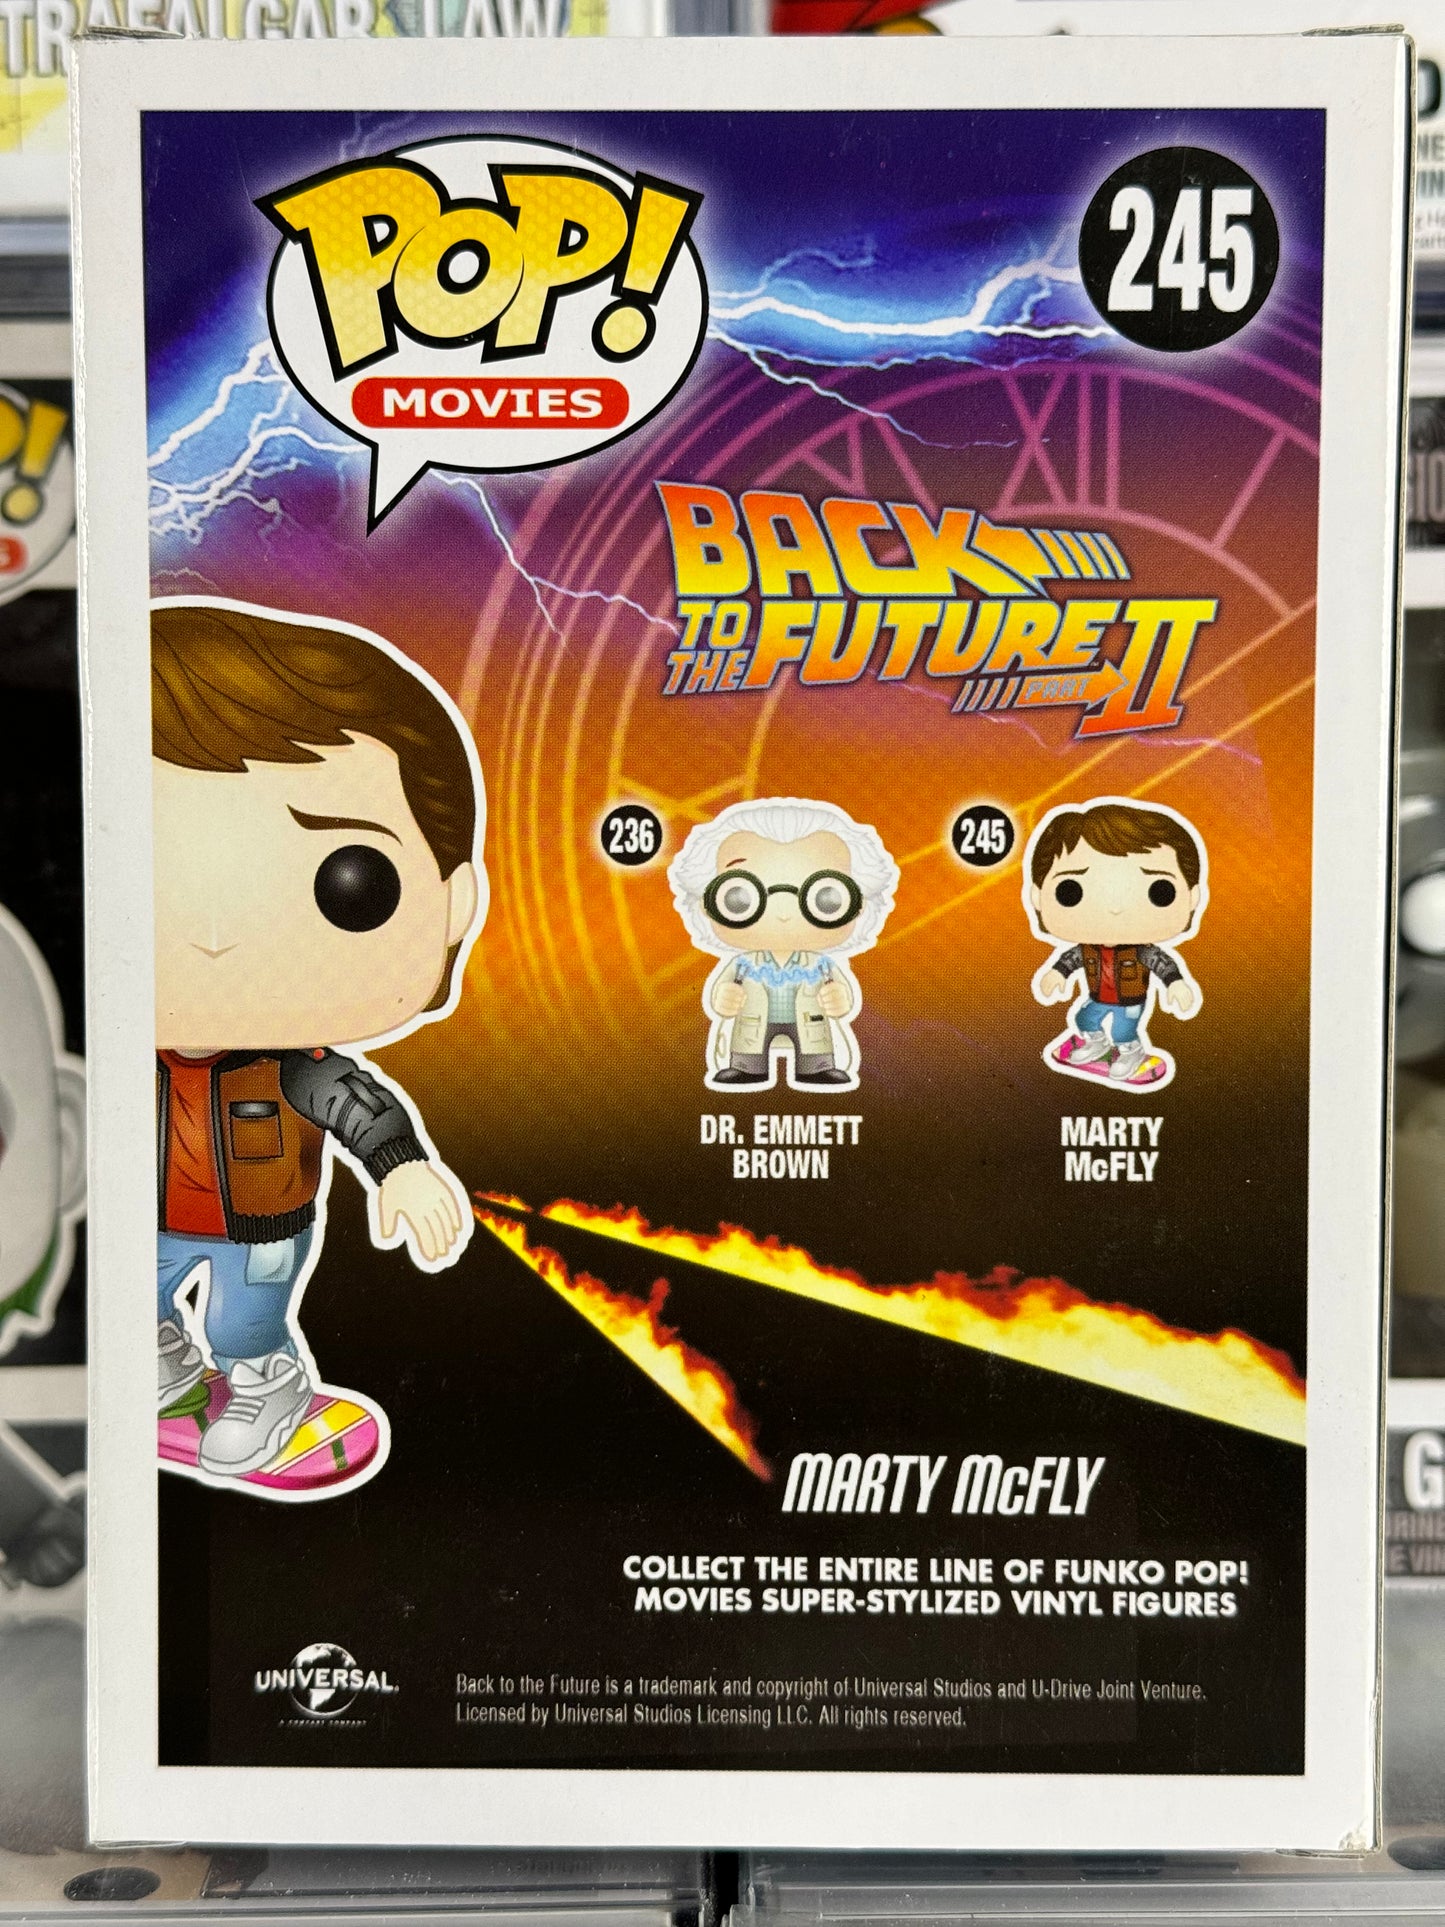 Back to the Future II - Marty McFly (with Hoverboard) (245) Vaulted